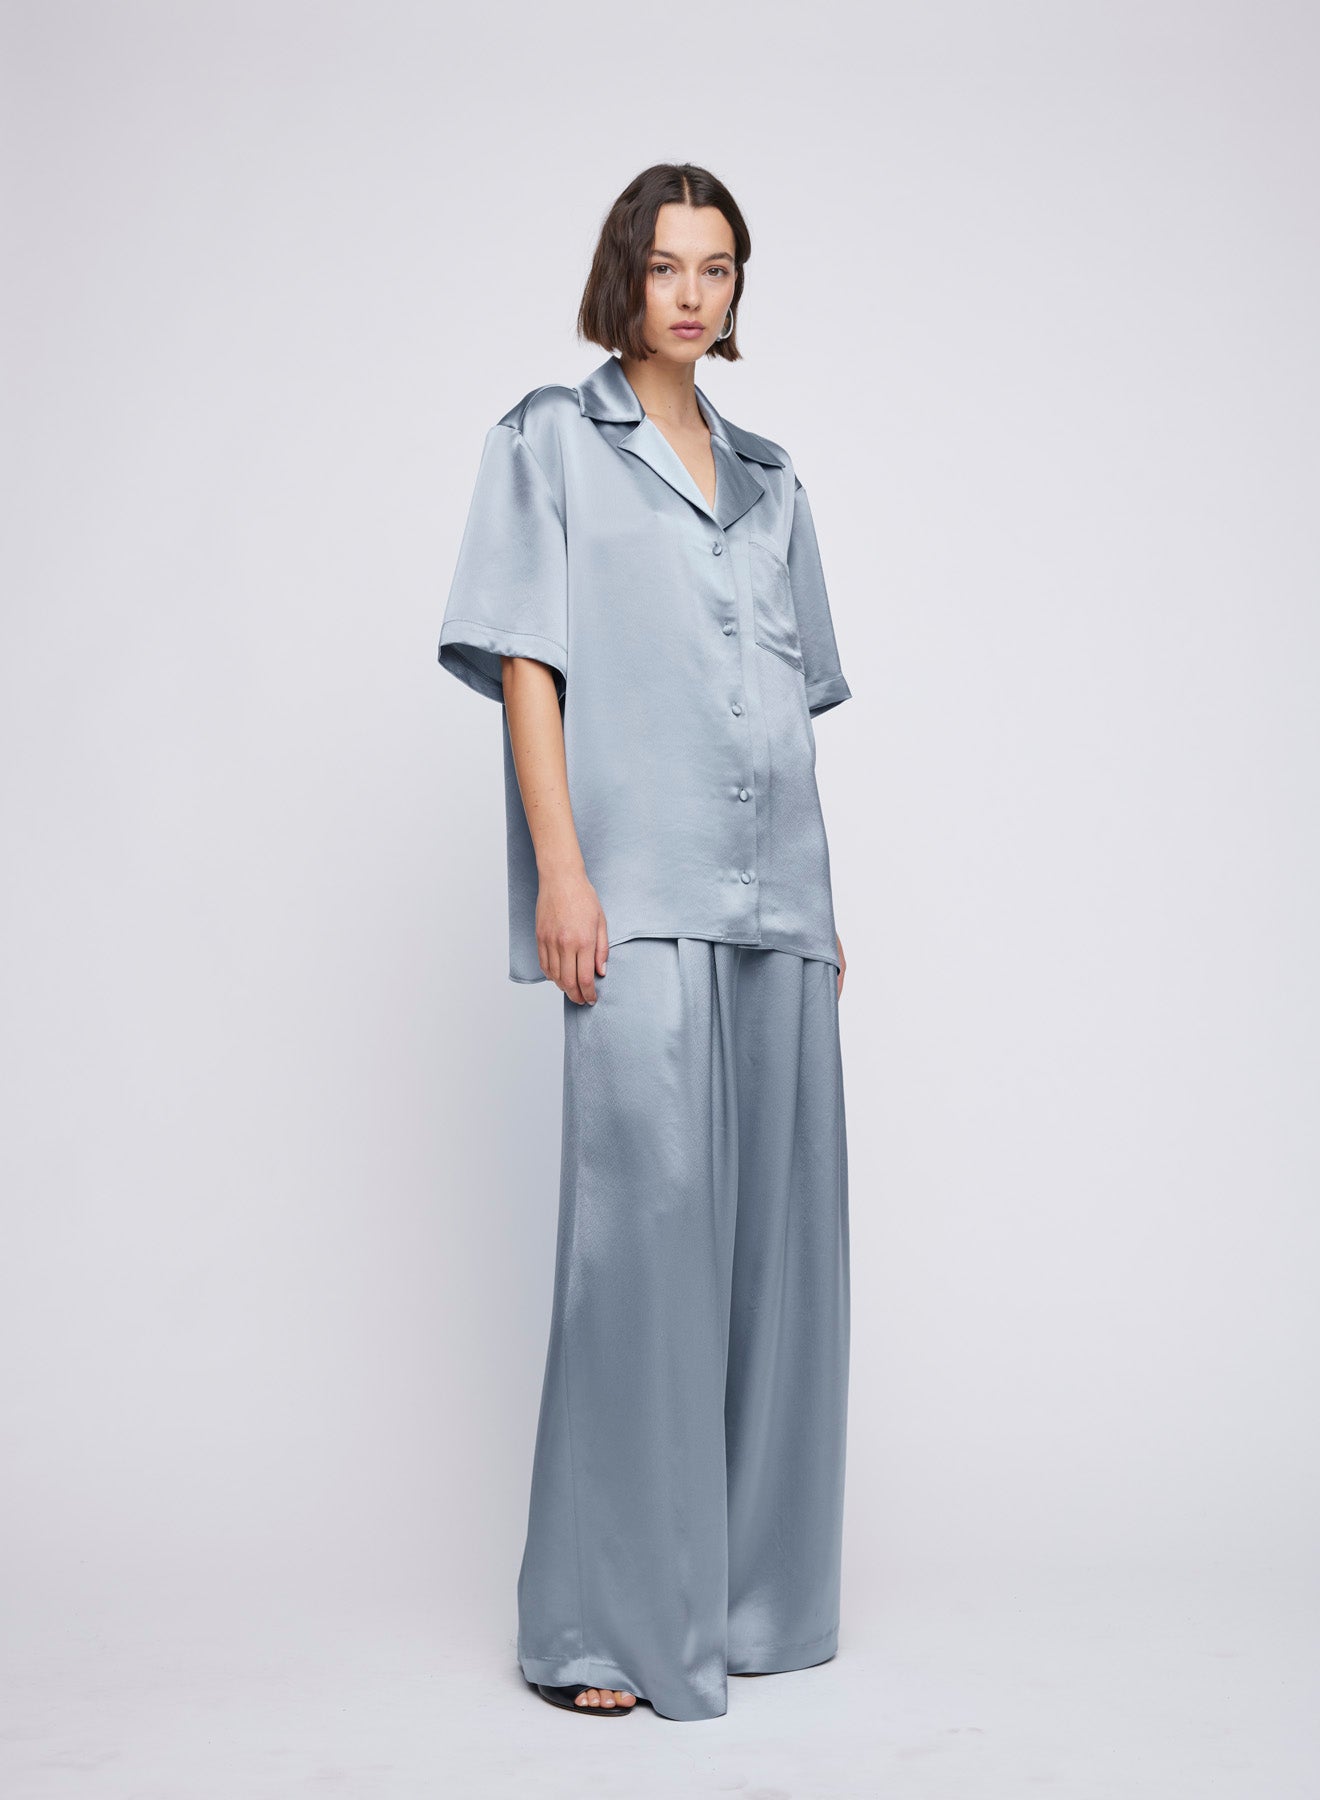 Satin Oversized Camper Collar Short Sleeve Shirt – an relaxed oversized satin shirt, designed with a boxy shoulder, camper collar, breast pocket, and back yoke. Wear with the wide leg matching Mateo Pant. An elevated everyday look worn with sandals or go from day-to-night and pair with heels for a dinner matching set, dinner shirt, party set or event set.